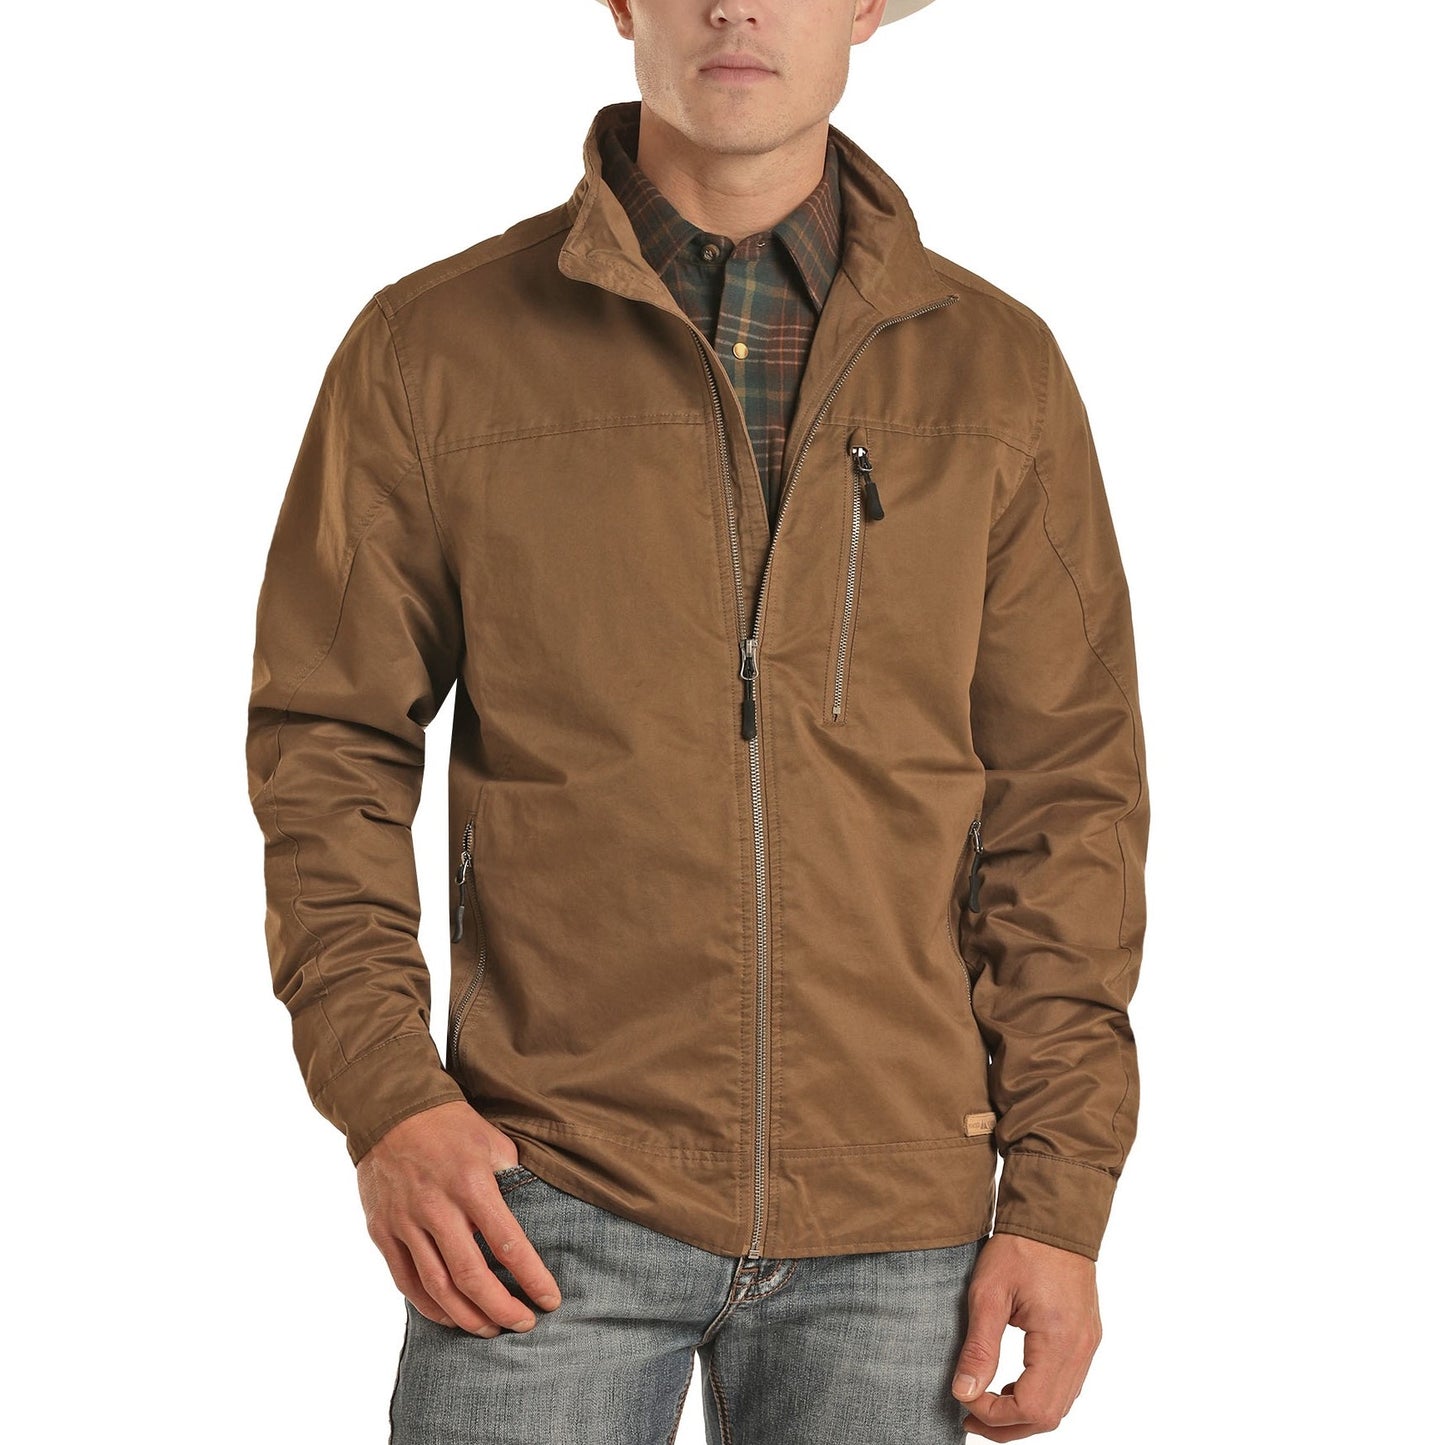 Powder River Outfitters Men's Camel Ranch Jacket 92-6757-25